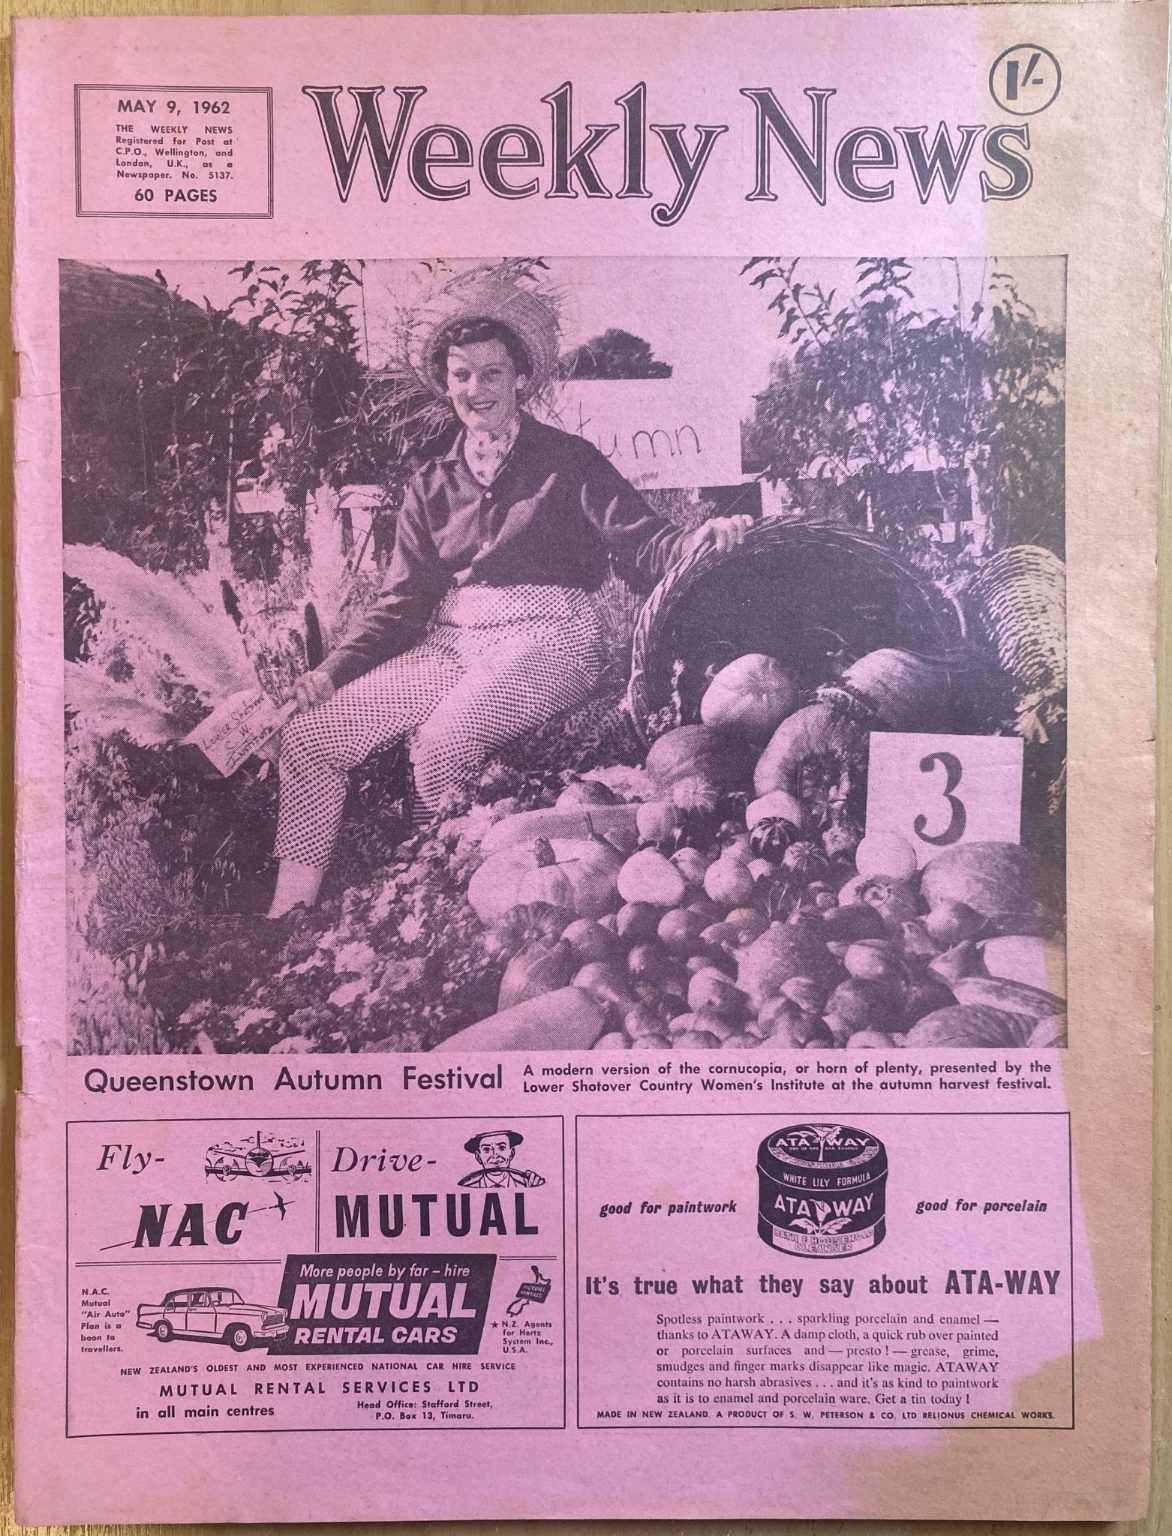 OLD NEWSPAPER: The Weekly News, No. 5137, 9 May 1962